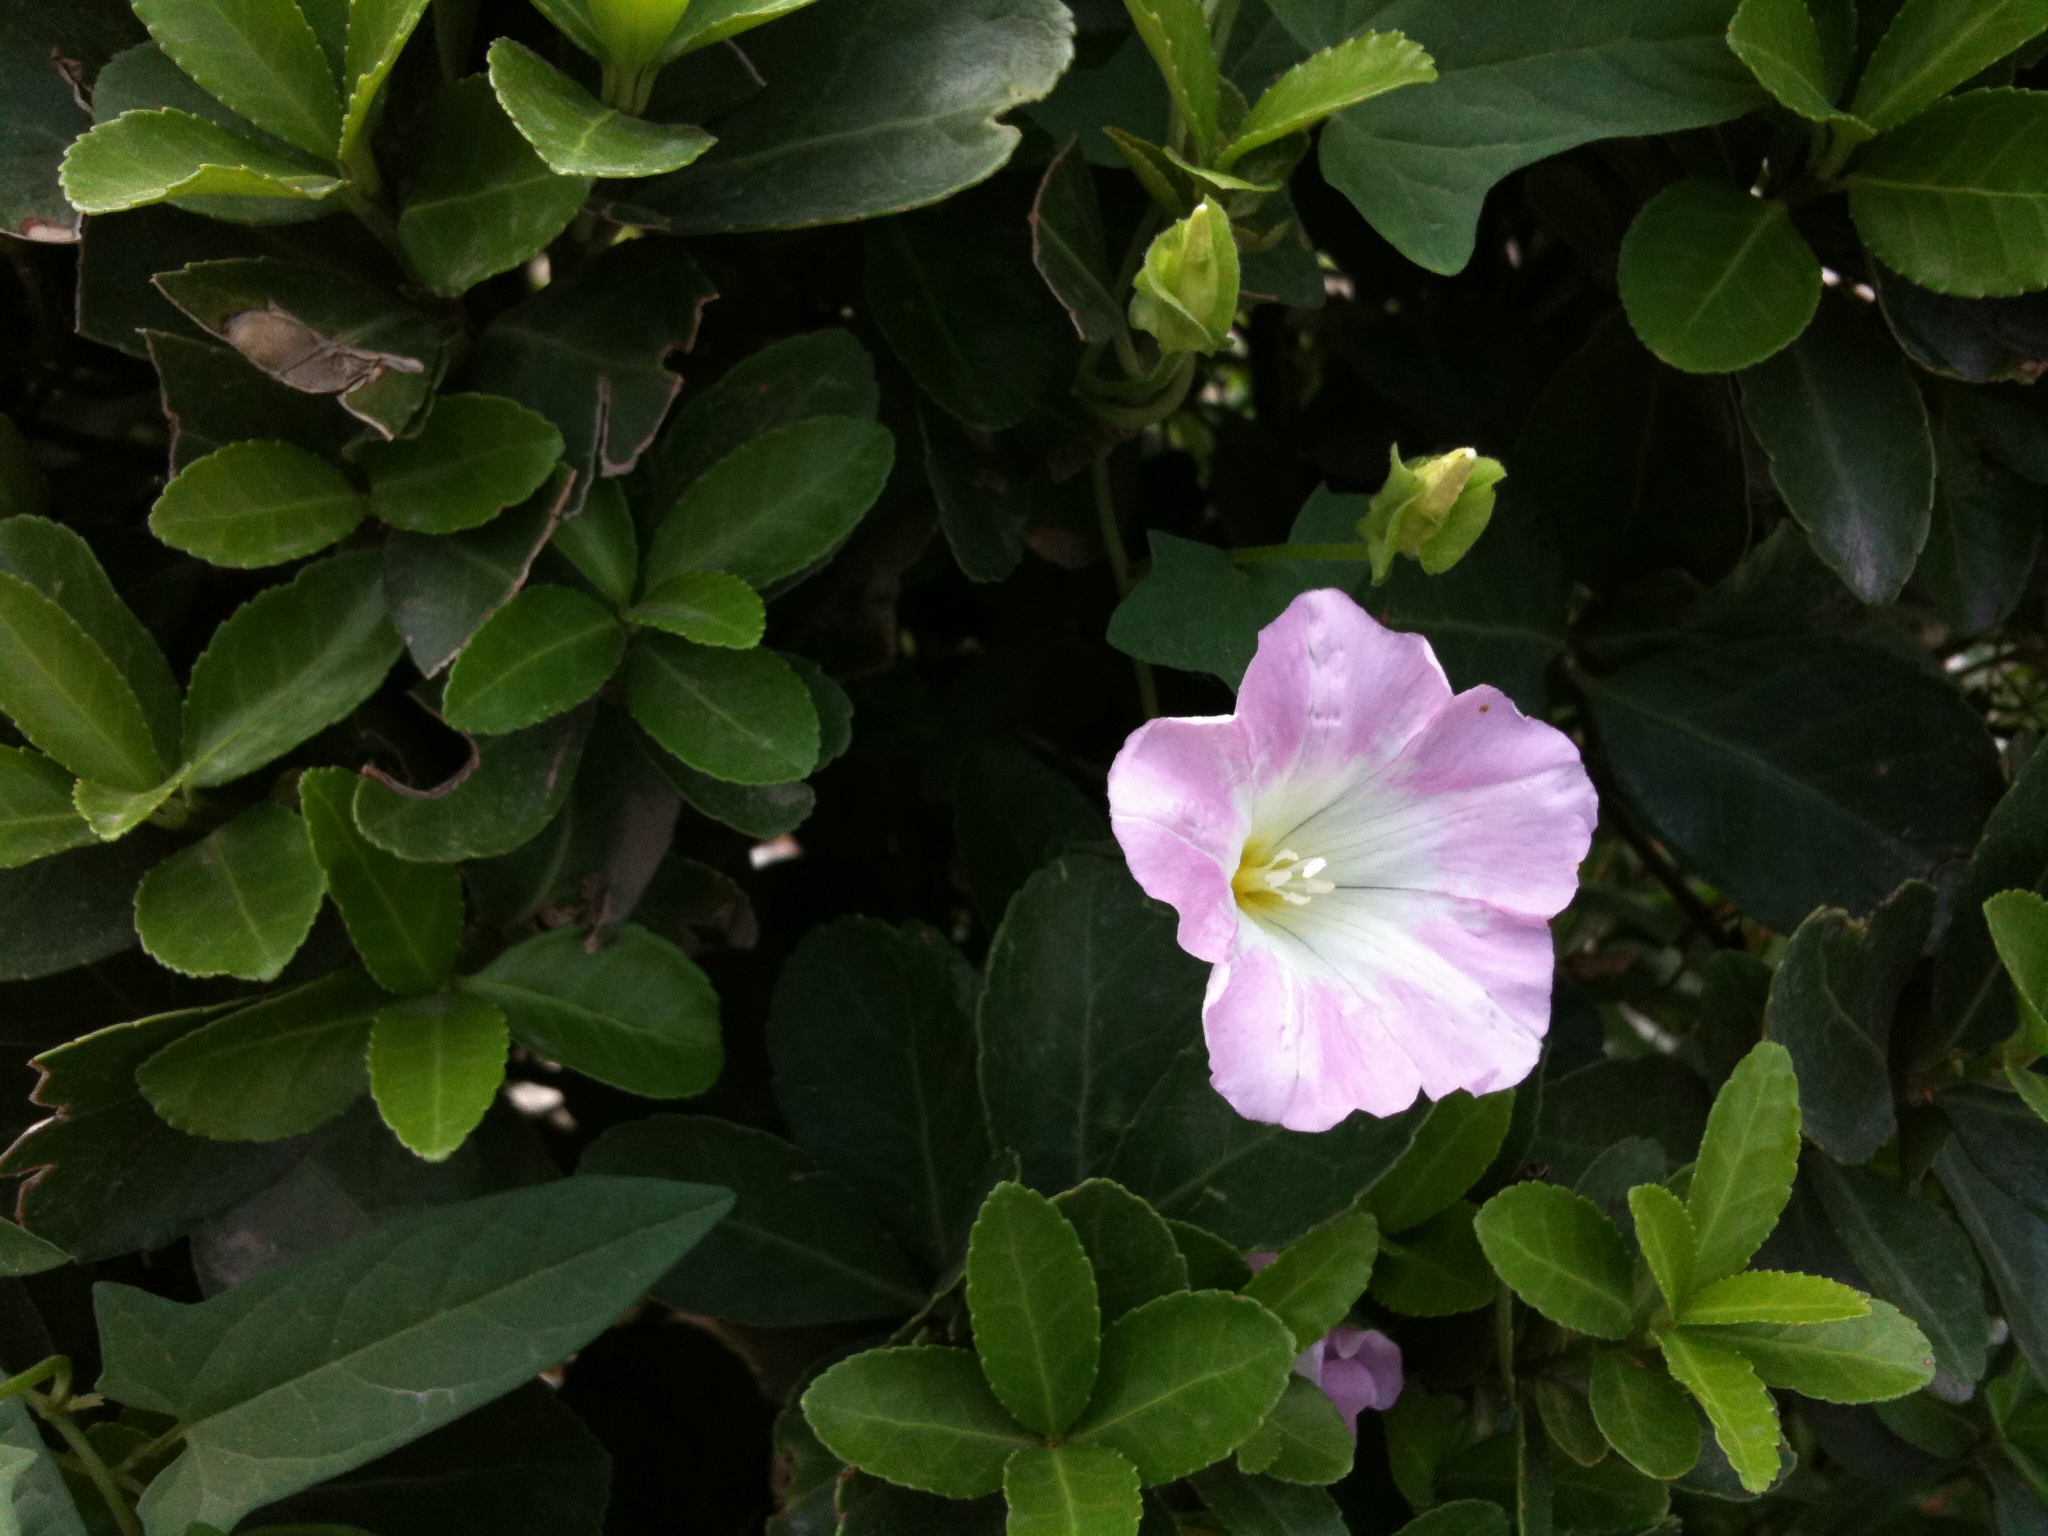 pink and white flowers are blooming amongst the greenery